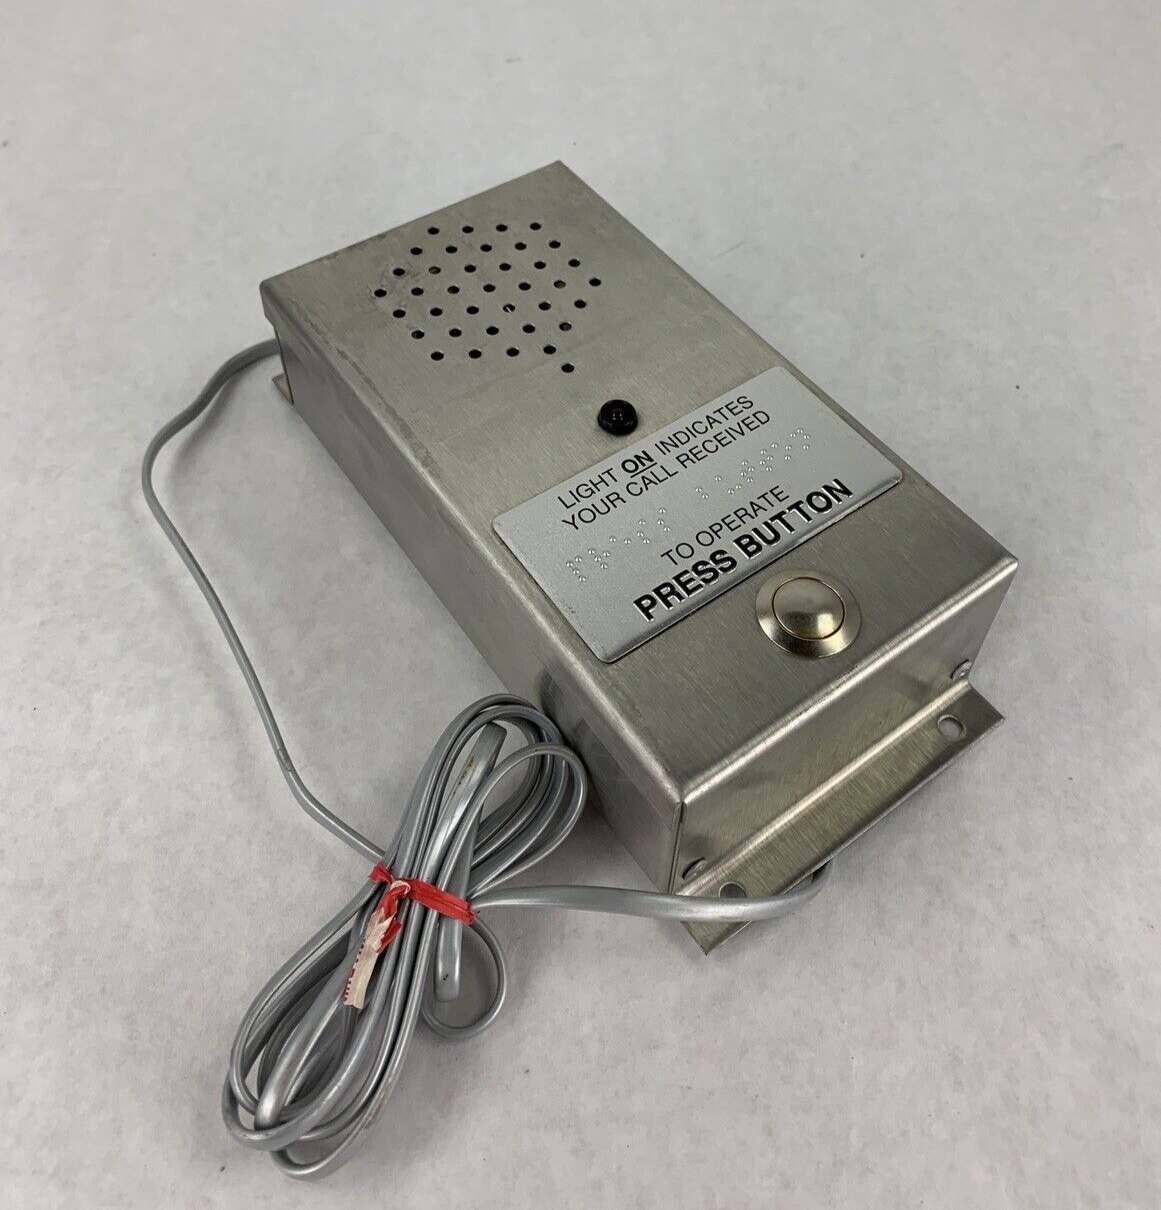 Lincolnland VRT-1000 Surface Mounted Push Button Phone Untested